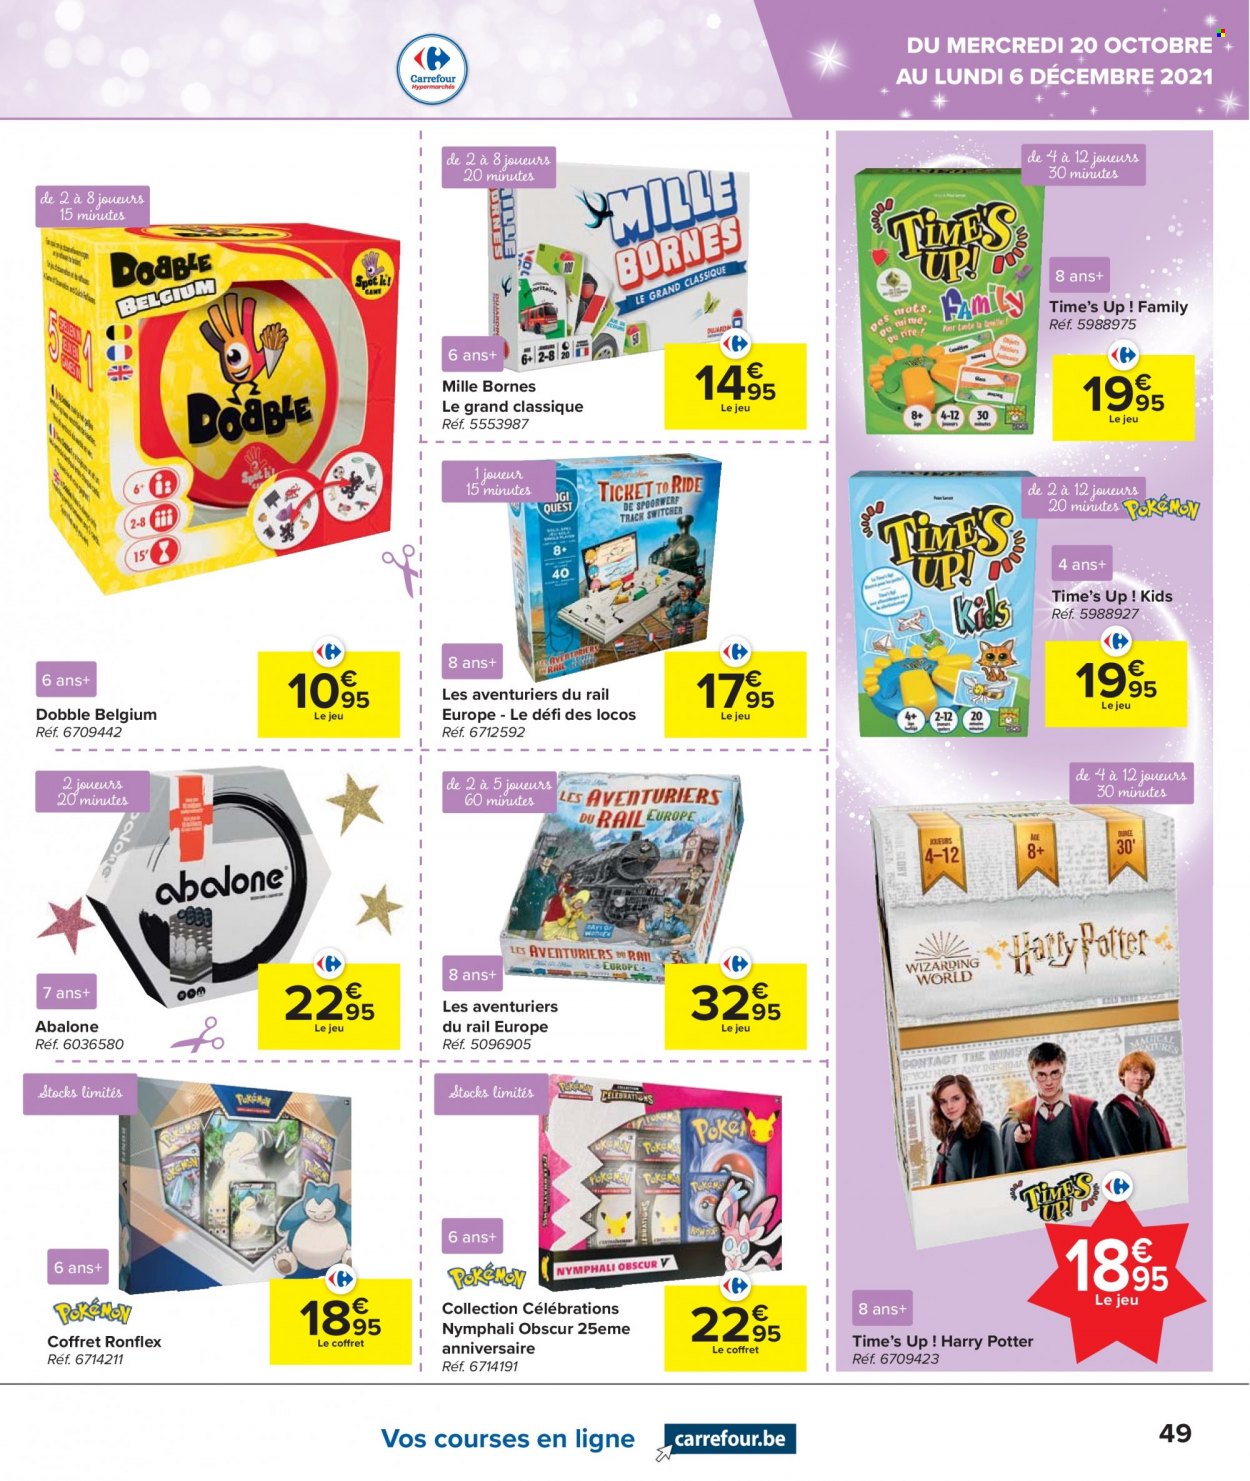 Catalogue Carrefour hypermarkt - 20.10.2021 - 6.12.2021. Page 49.